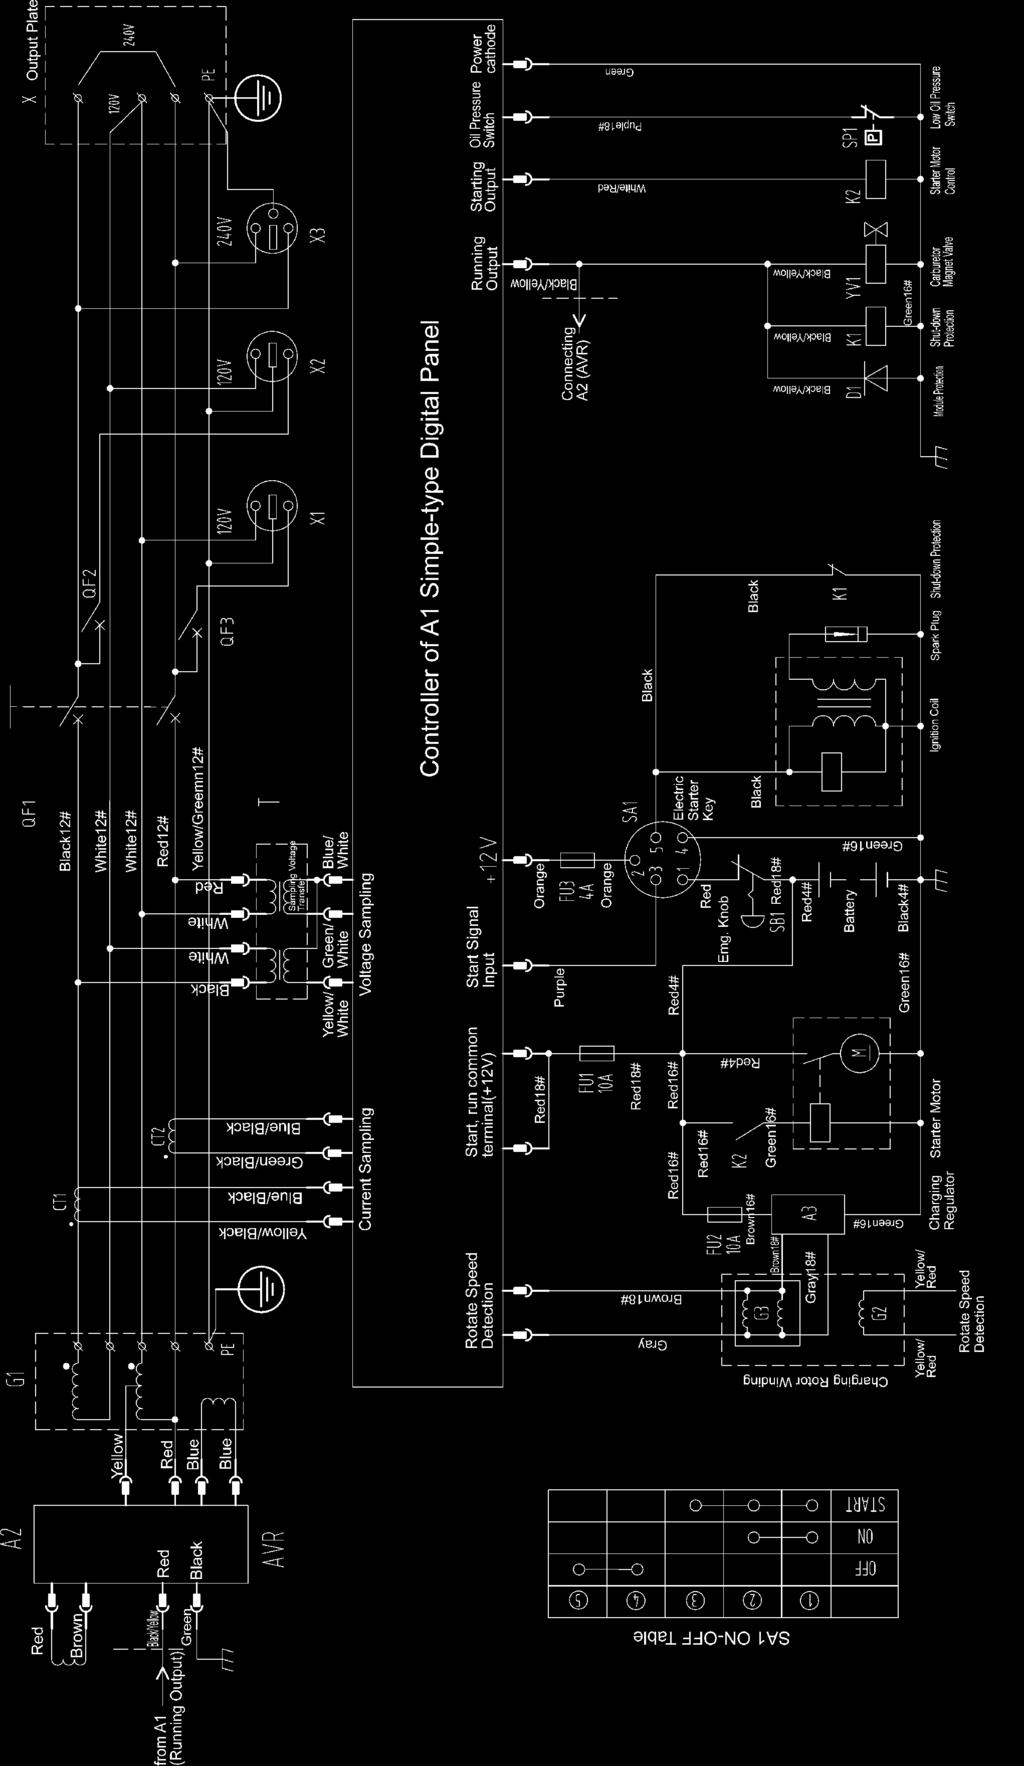 6. KGE1E3 ELECTRICAL WIRING DIAGRAM (Without Electric Governing) (DOUBLE VOLTAGE OUTPUT).